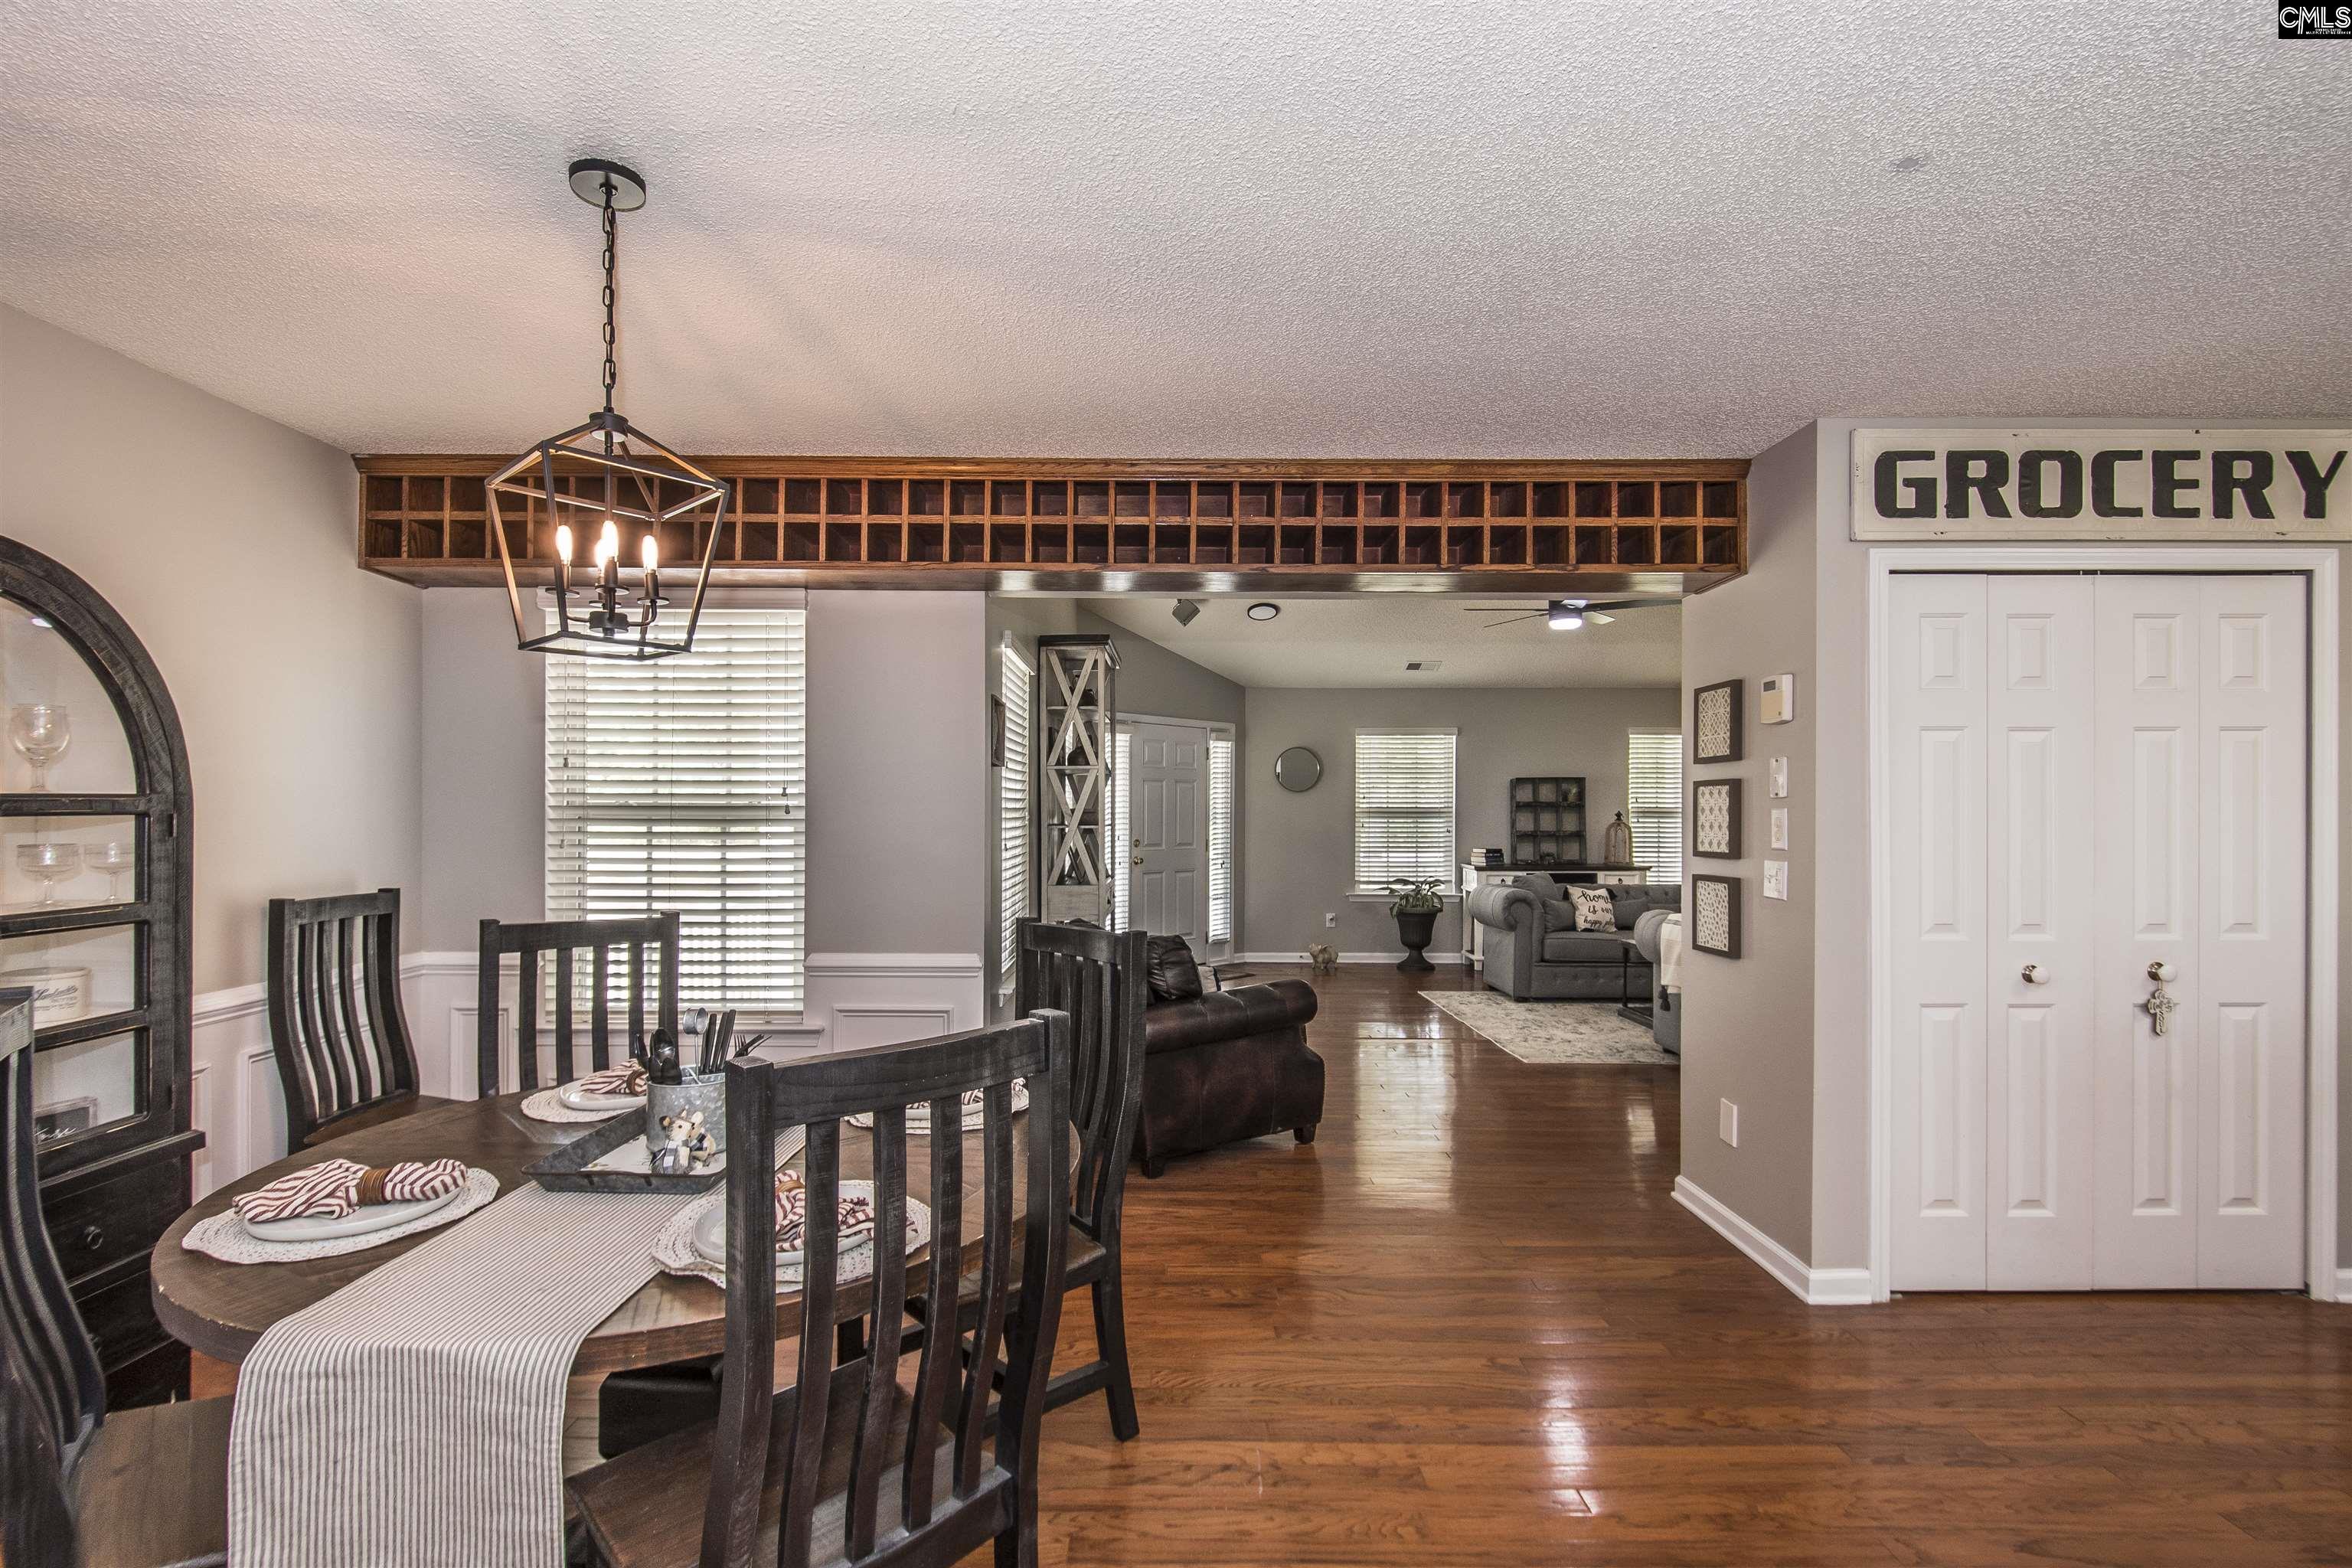 Enter the home with this gorgeous vaulted ceiling, hardwood floors surroundsound audio system